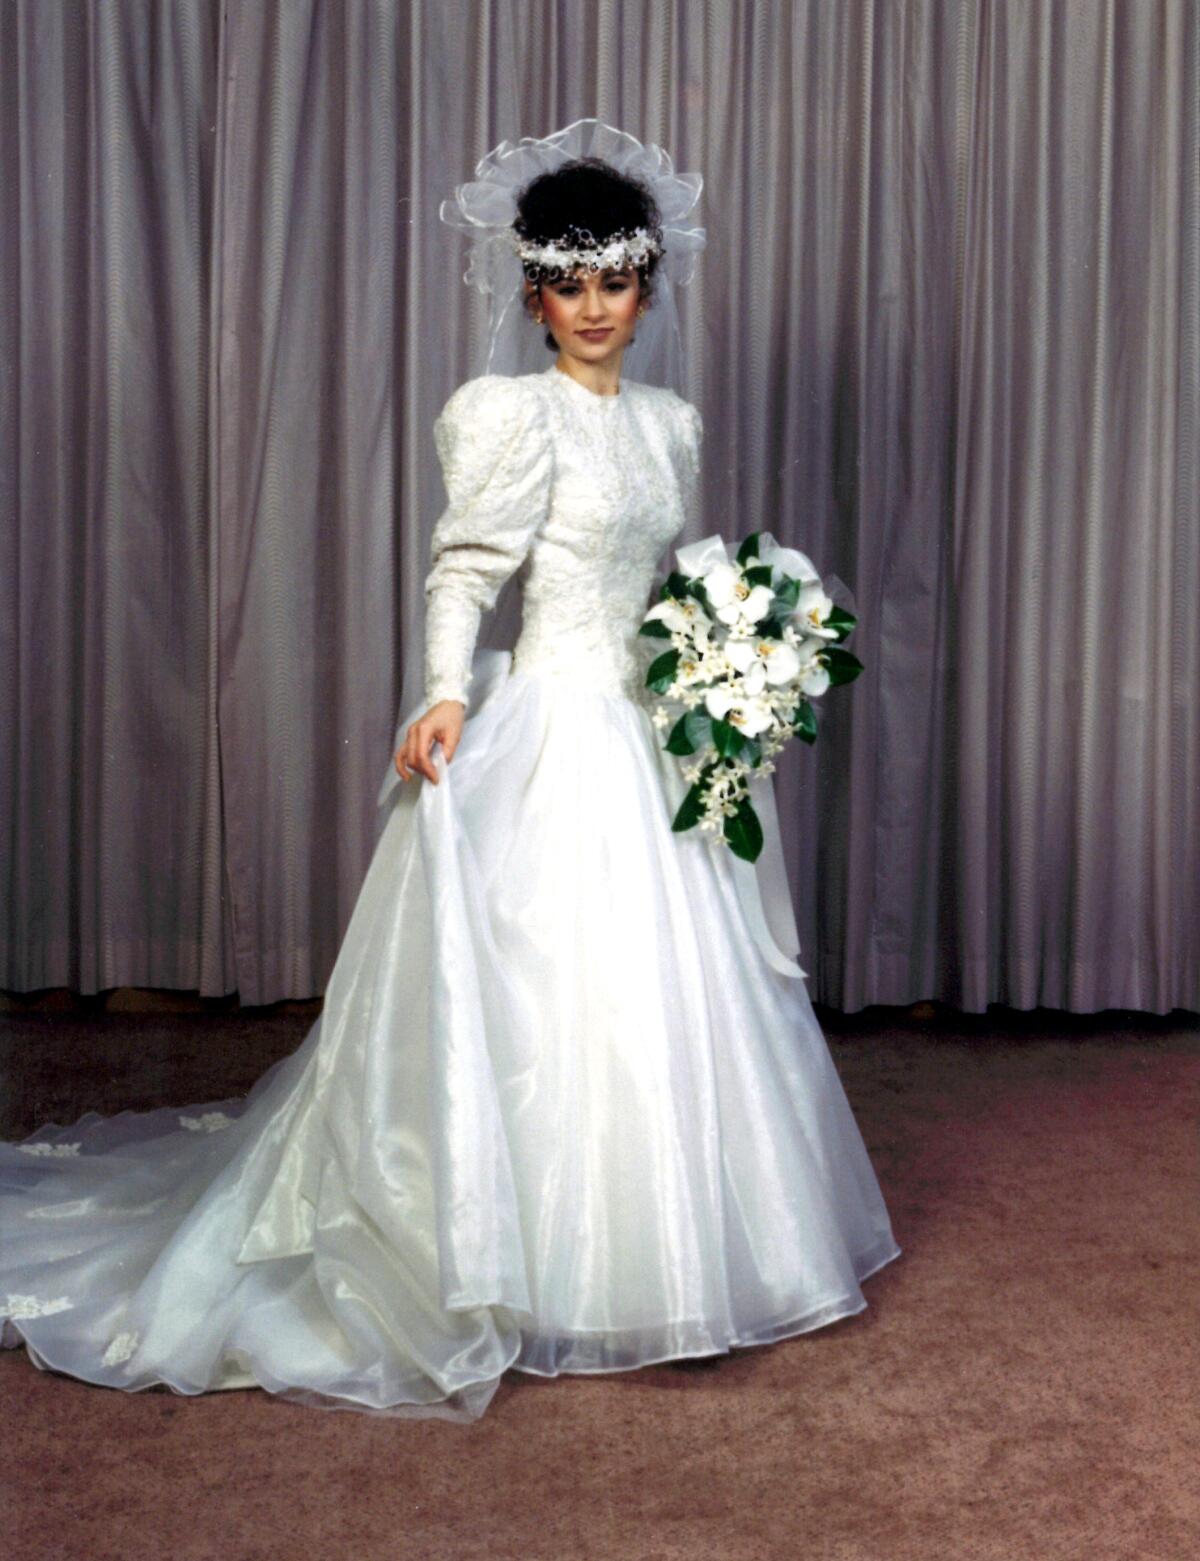 A woman in a long-sleeved white wedding gown.